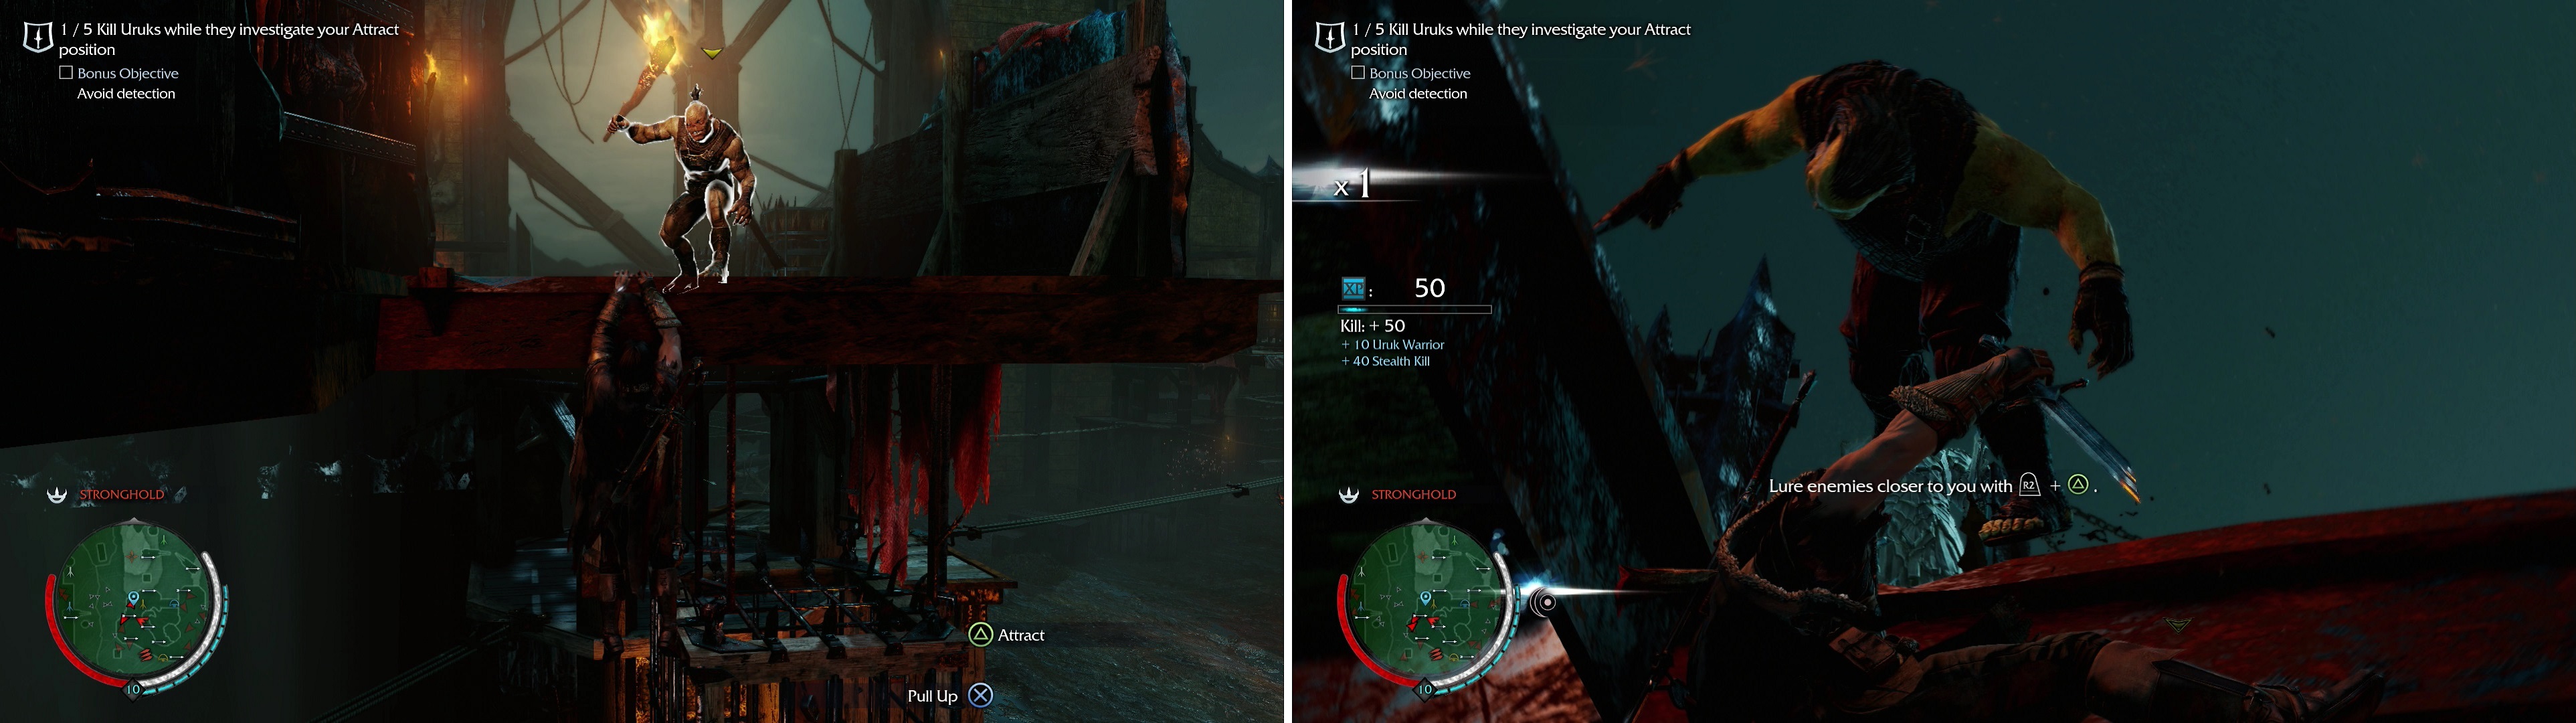 Use the "Attract" ability to lure Uruks to you (left) then perform a Ledge Kill (right).